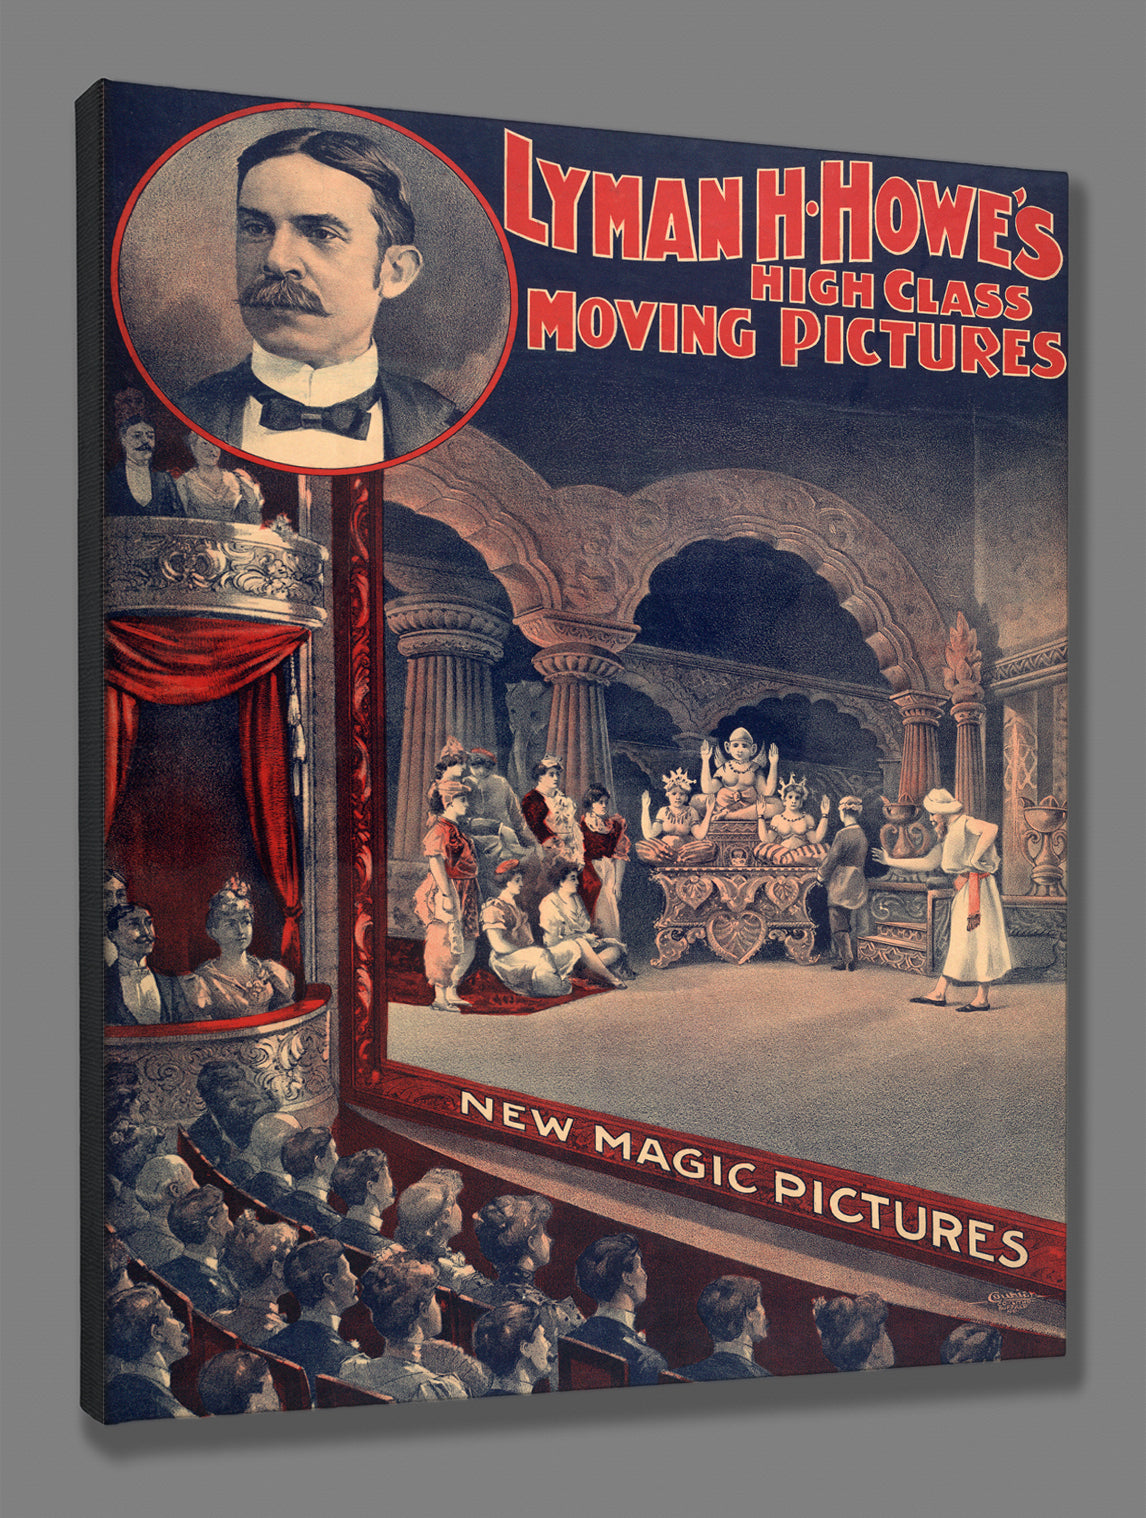 A stretched canvas print of a vintage poster for "high class moving pictures"